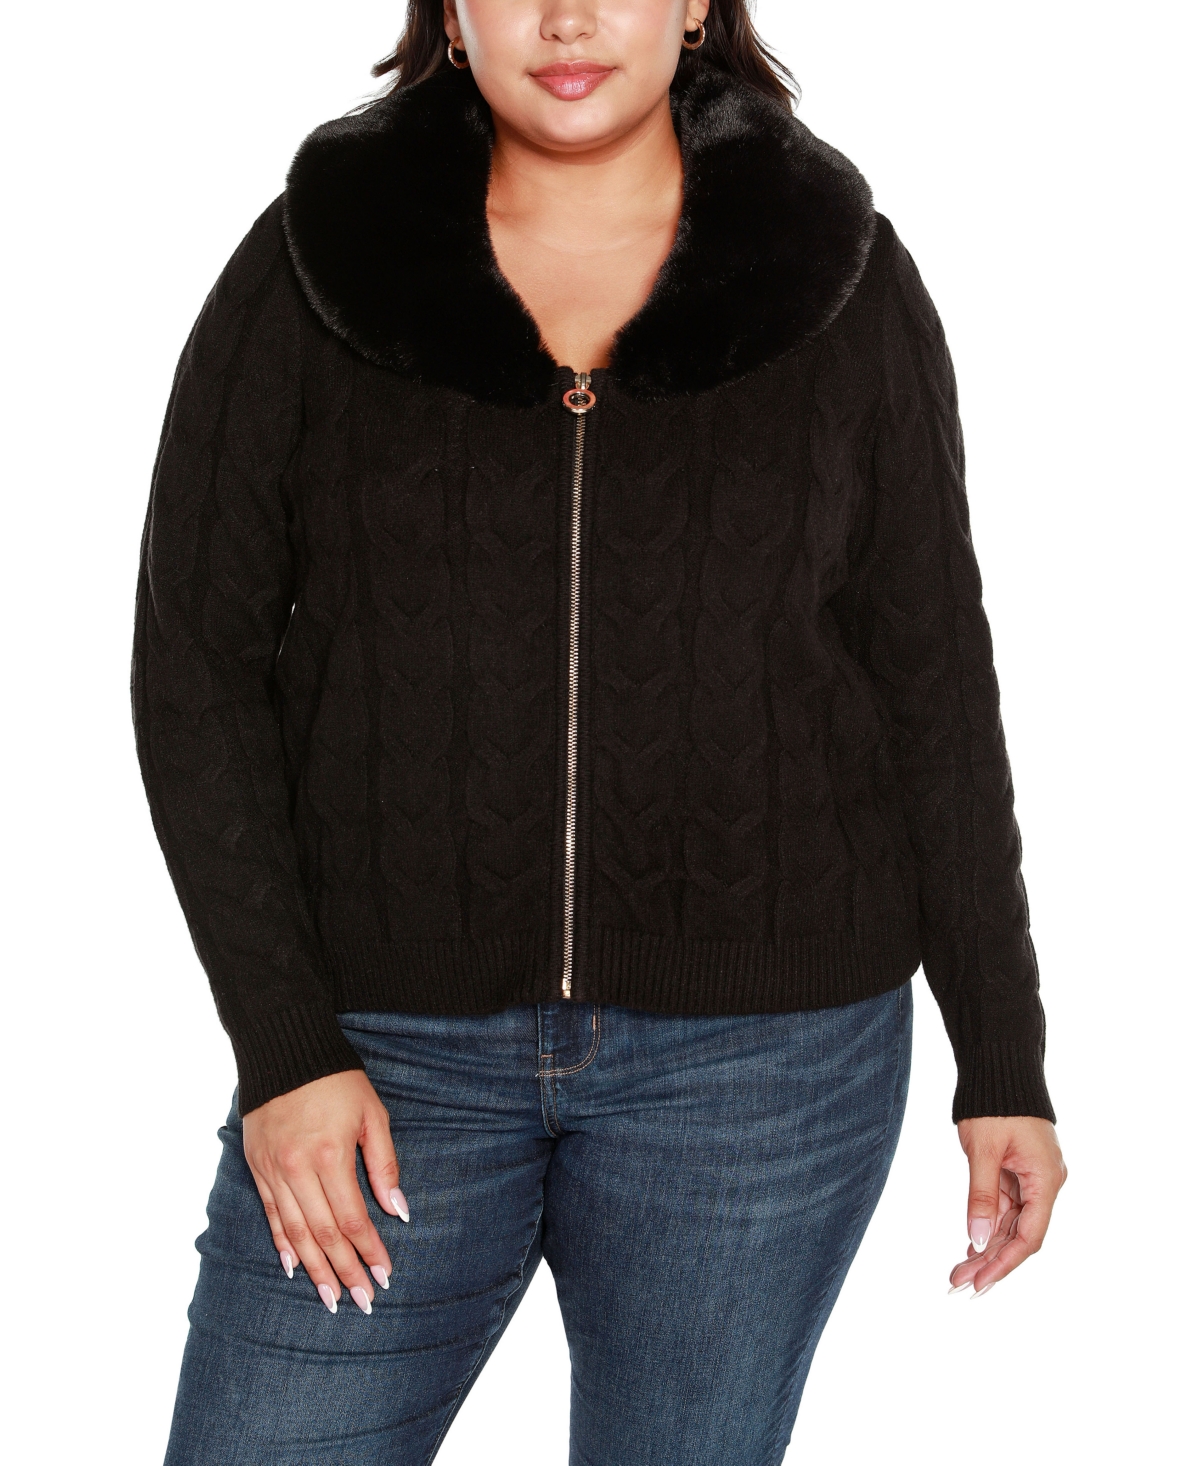 Black Label Plus Size Faux Fur Collared Cable Cardigan Sweater - Winter White